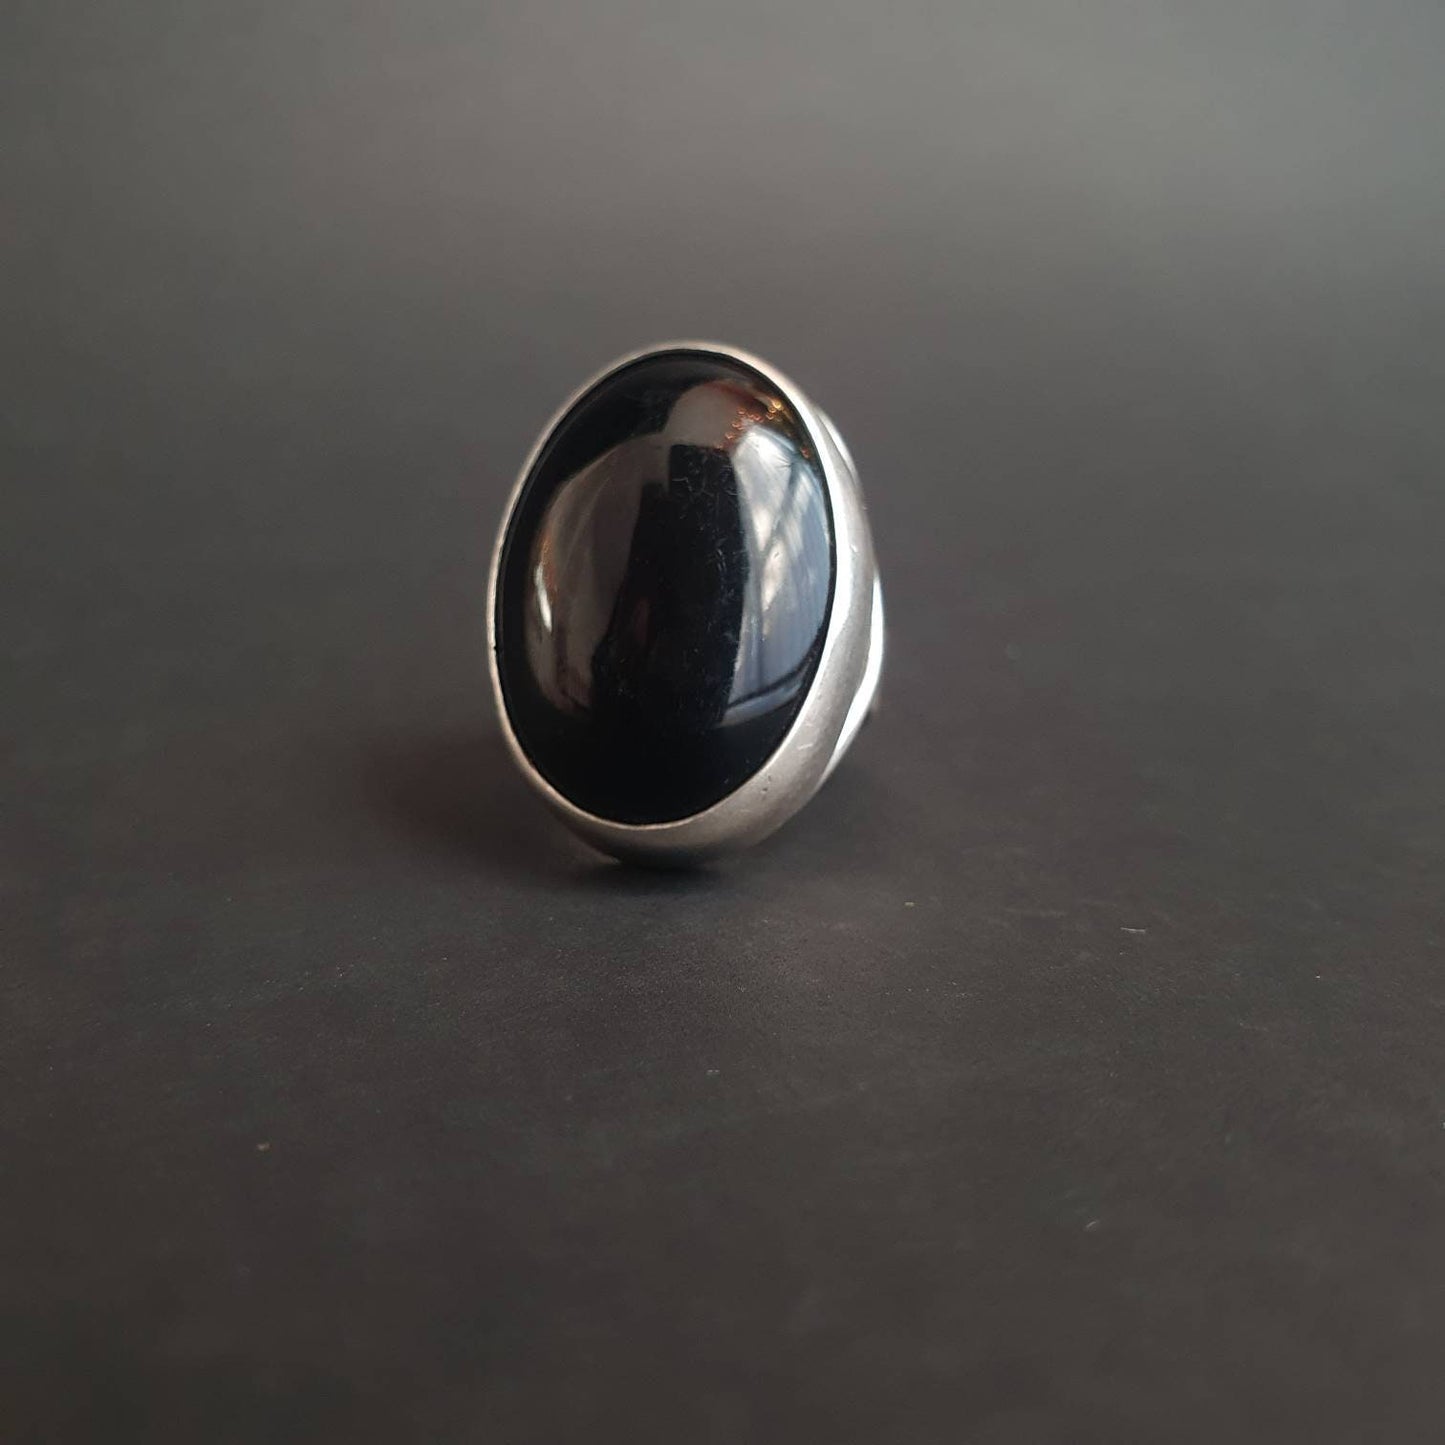 Chunky statement ring, black onyx ring 925, sterling silver Statement ring 925, large black onyx ring, Gothic ring, witchy ring, tribe ring